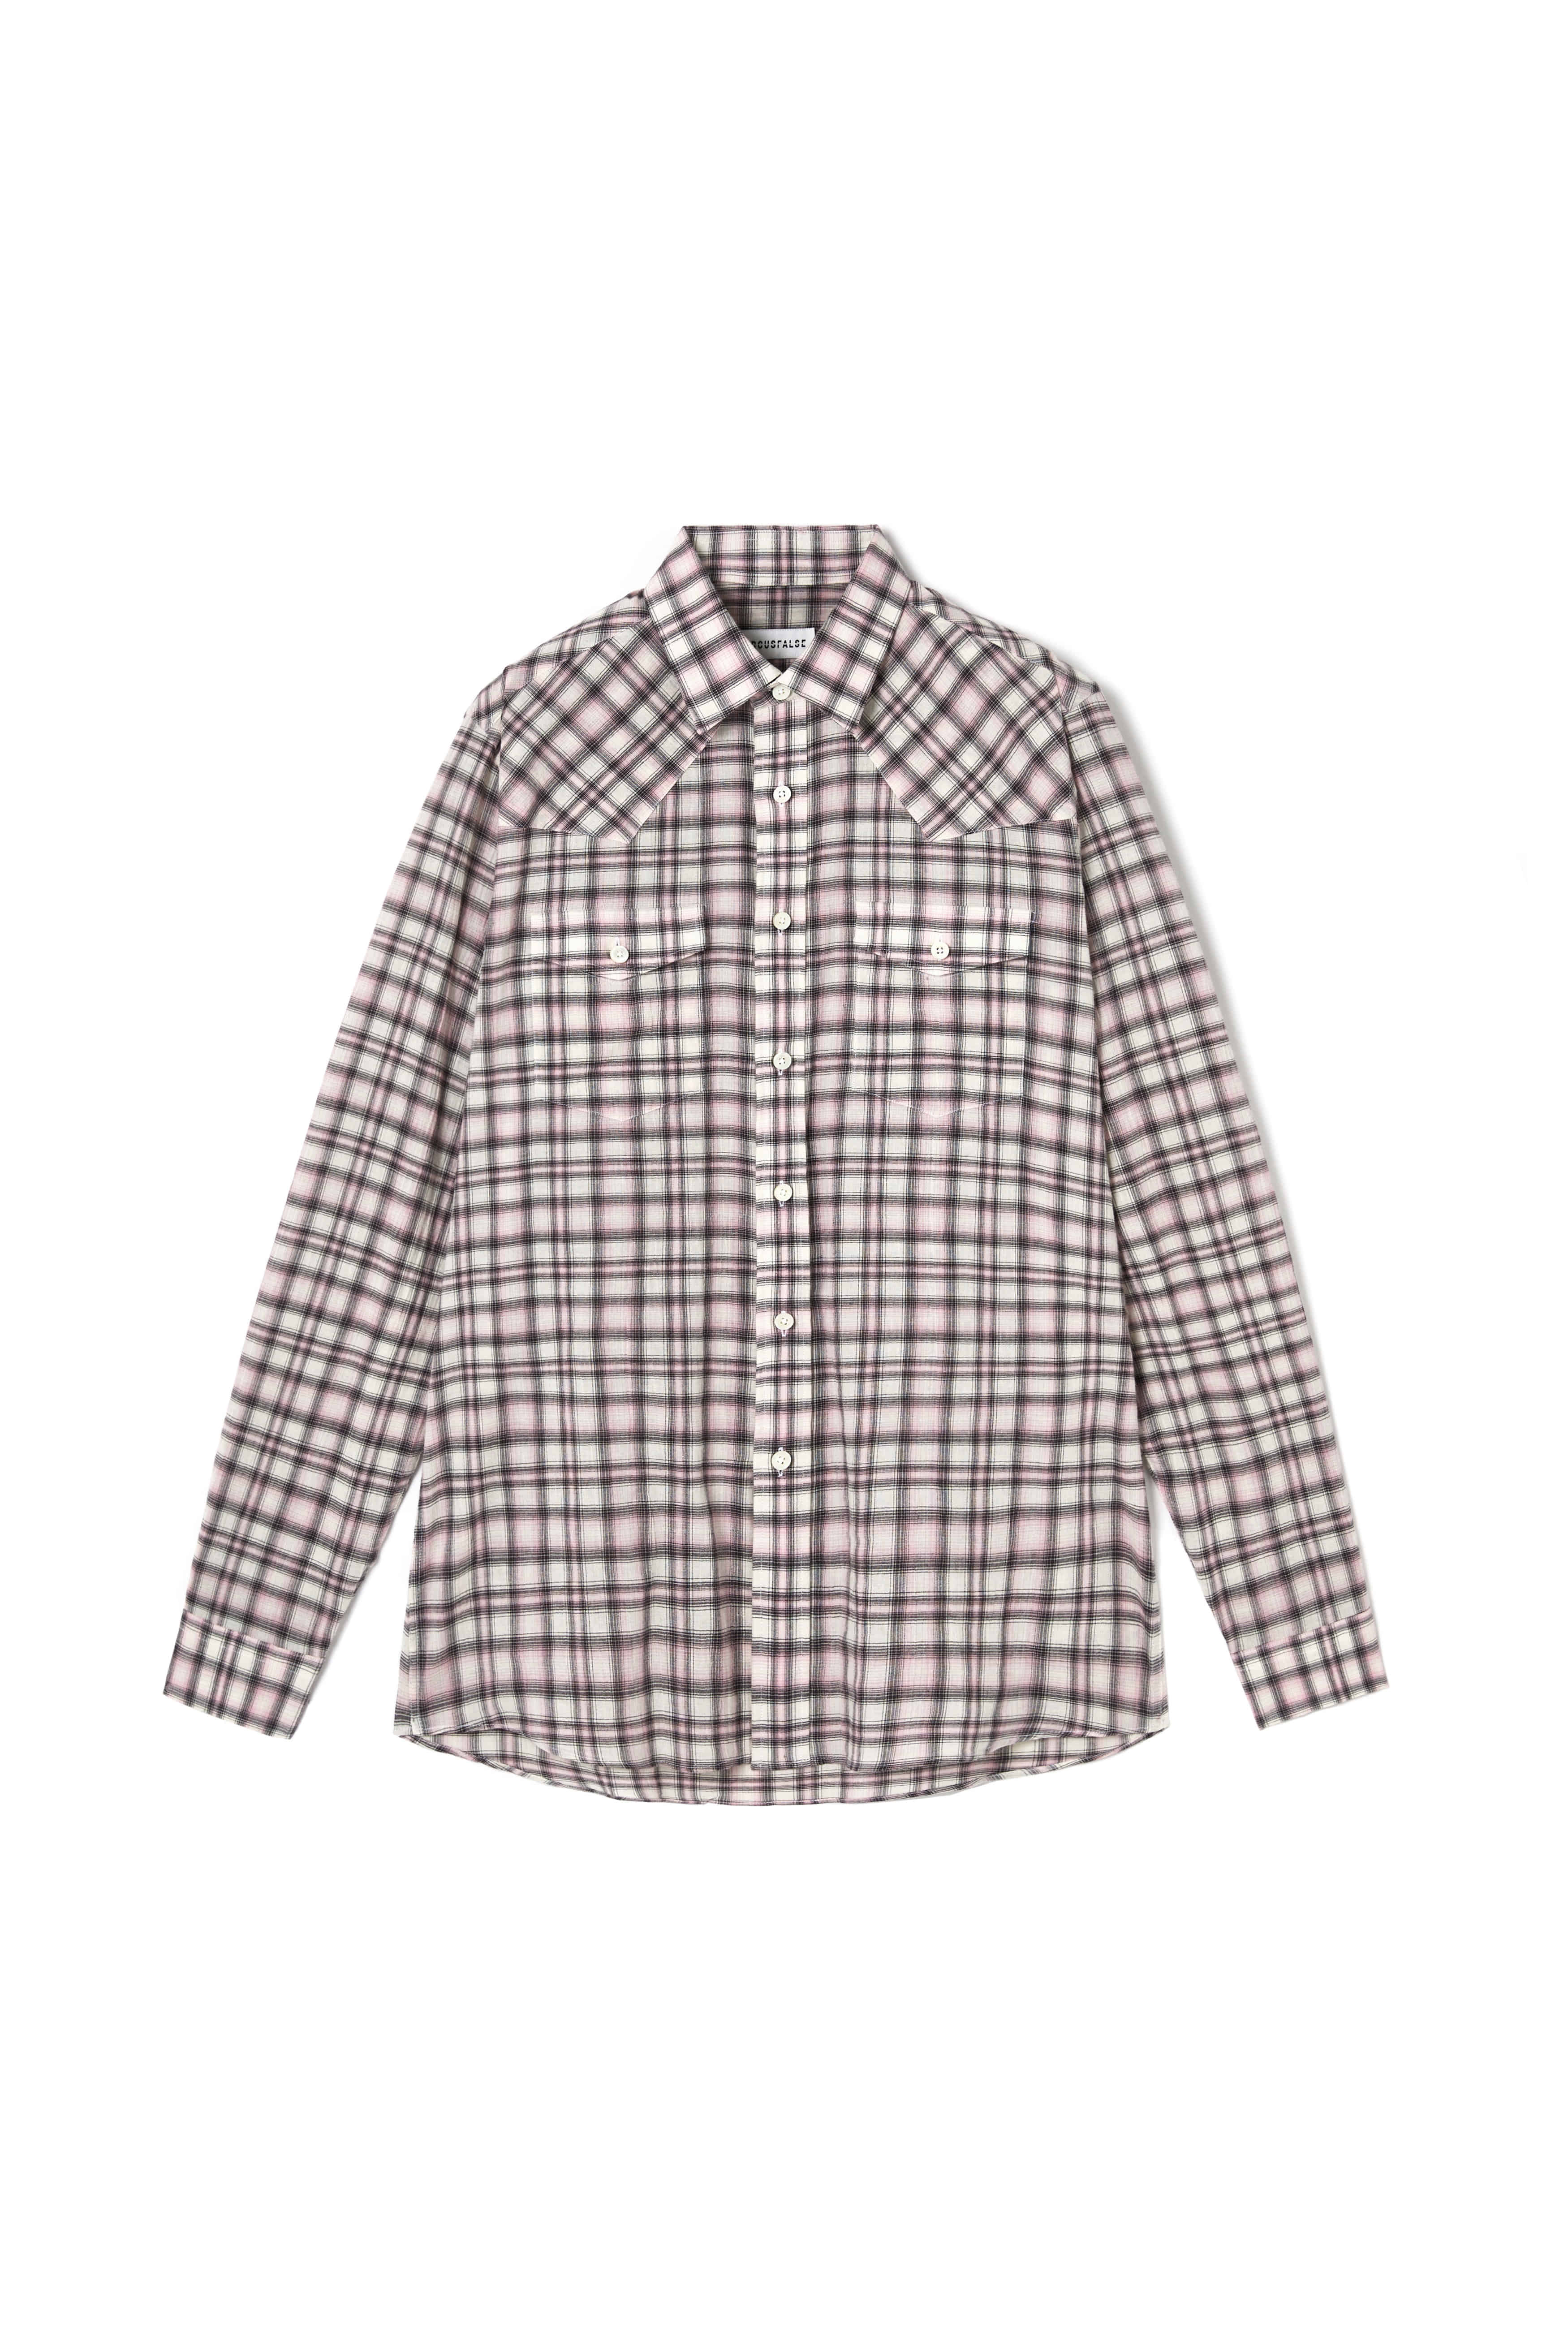 CIRCUSFALSE: WESTERN SHIRTS IN PINK MULTI CHEKED